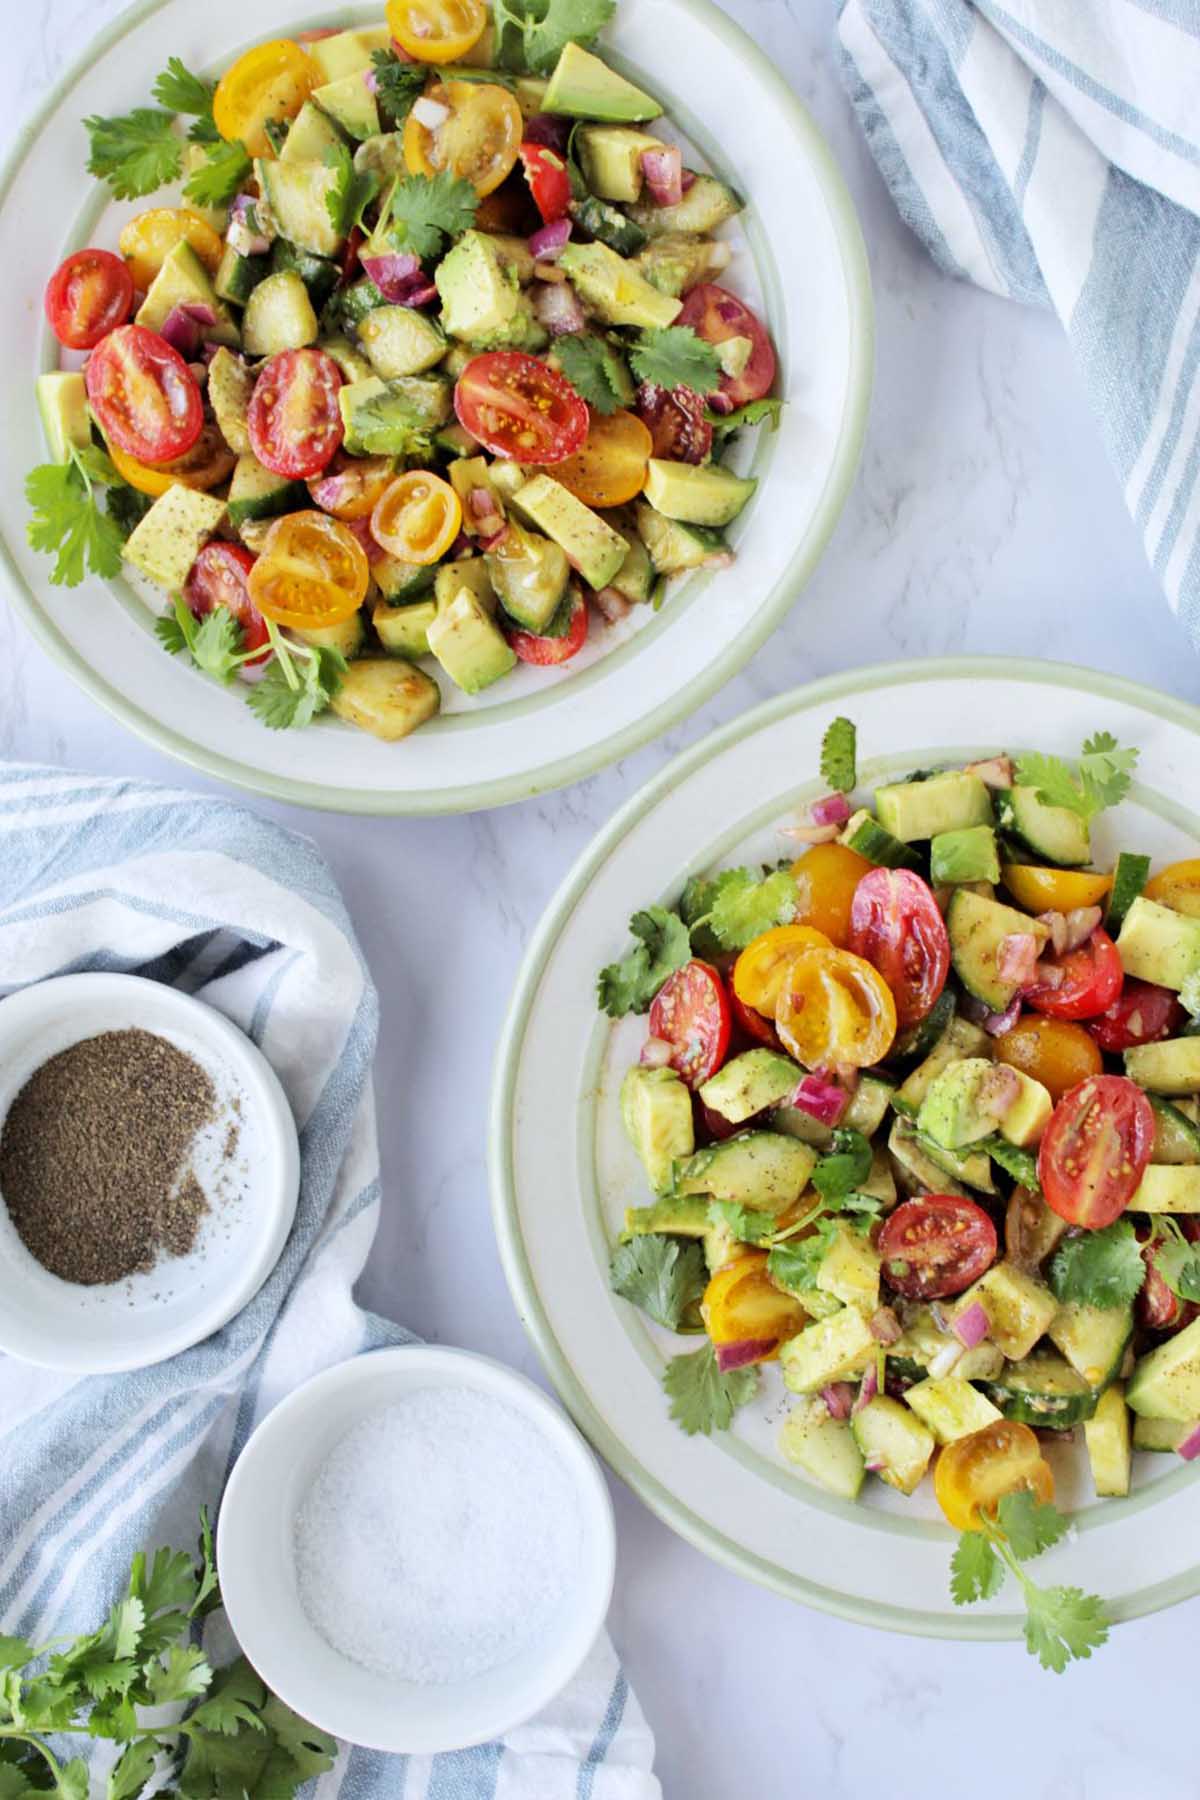 Two plates with Mexican avocado salad.